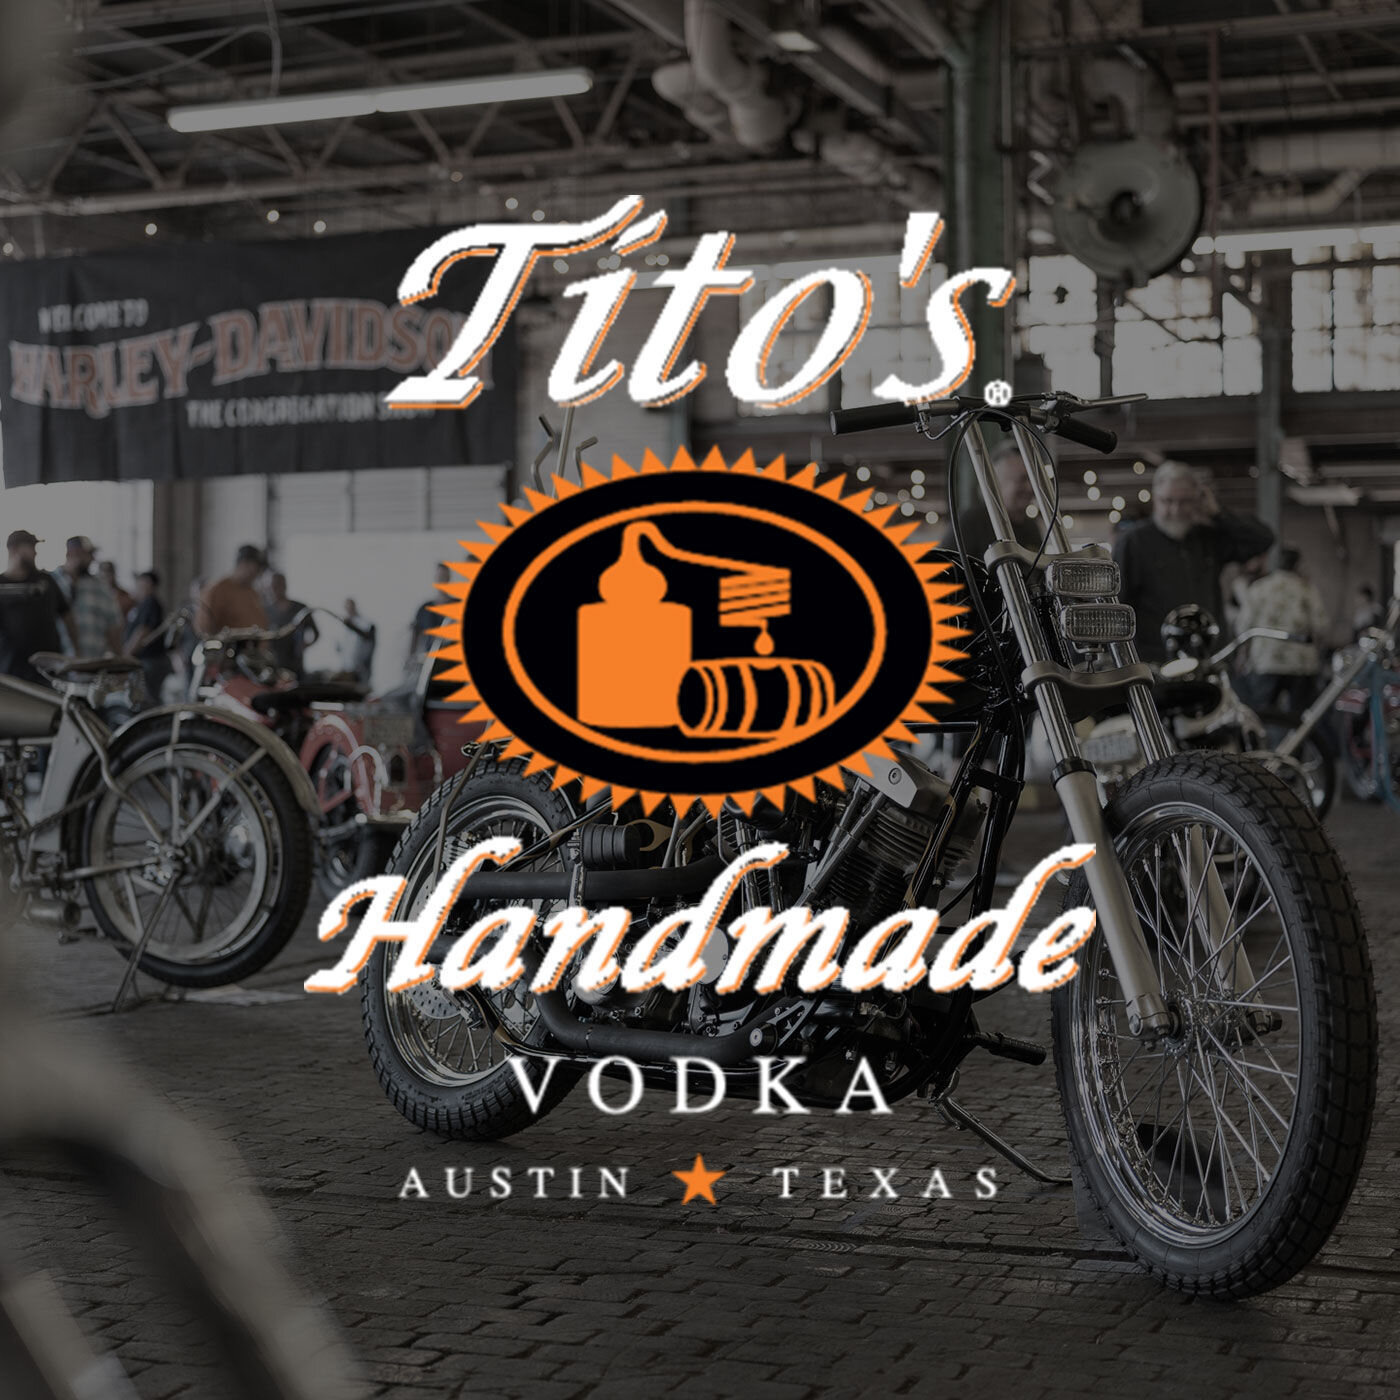 Announcing @titosvodka as a new sponsor of the show this year. The finest Vodka around can now be found at The Congregation Show! Excited to have them on board and looking forward to sharing a drink with y&rsquo;all!l